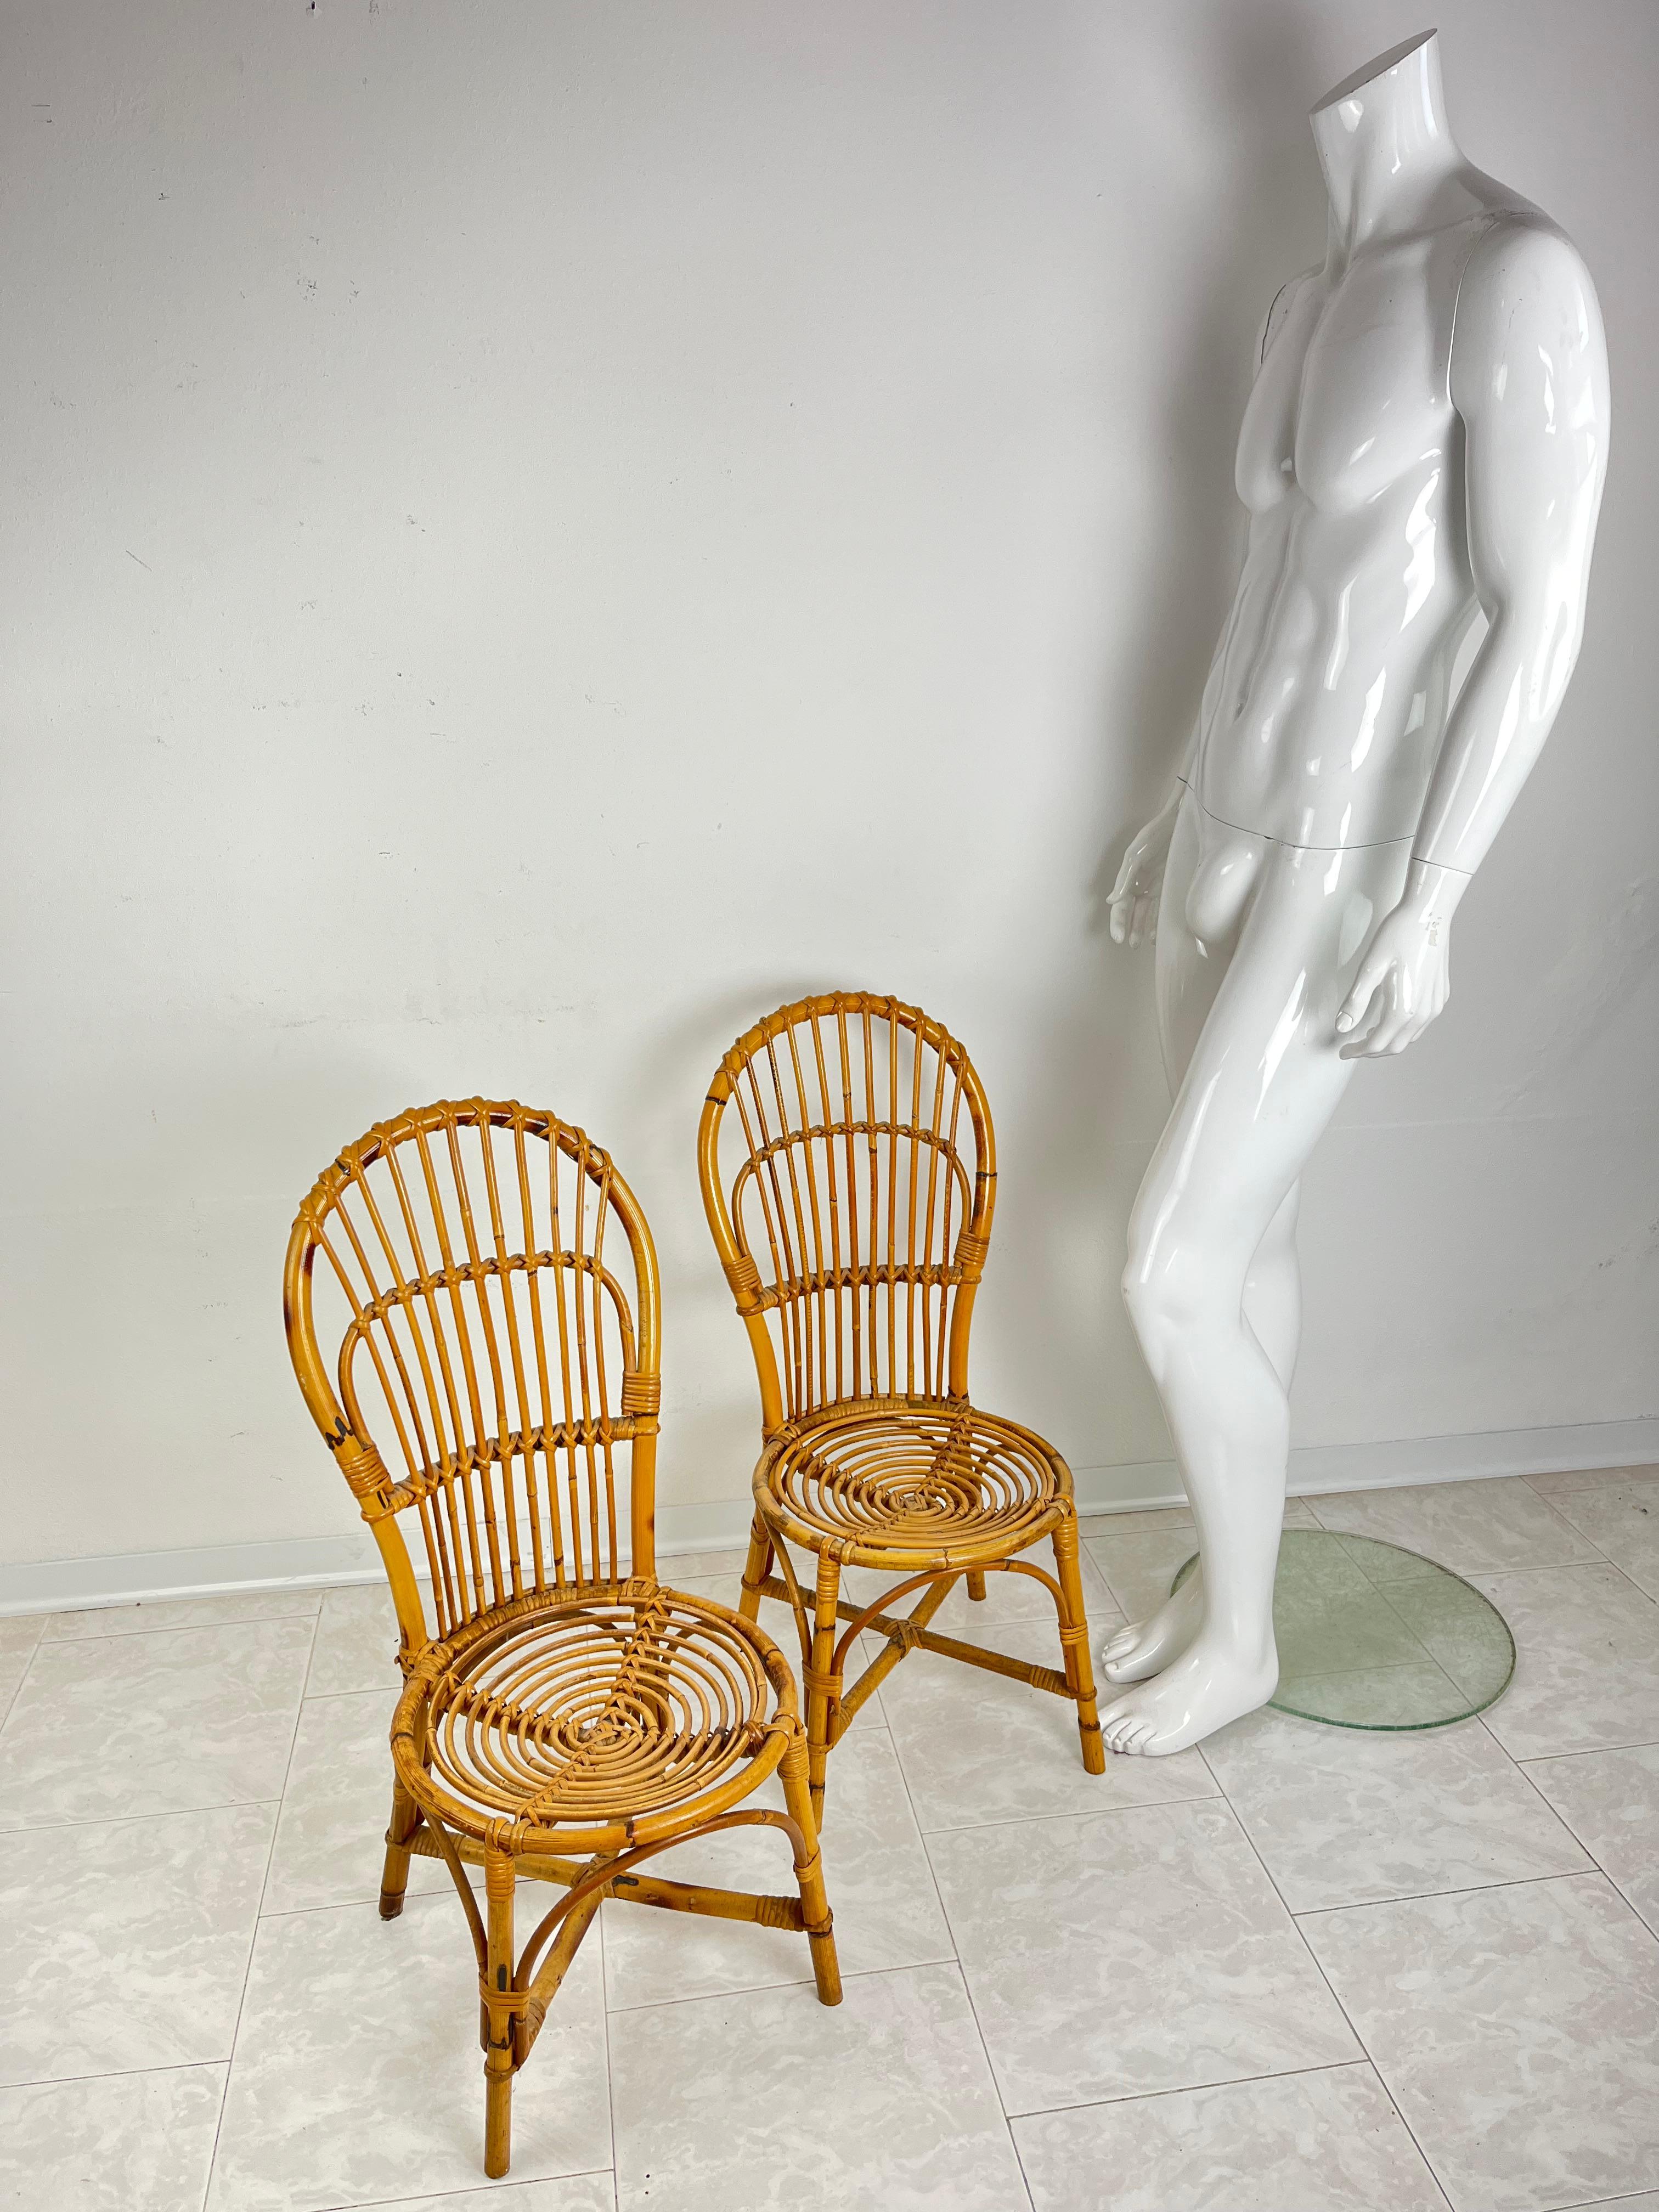 Set of 2 small mid-century bamboo chairs, Italian design 1950s
Intact and in good condition, small signs of aging.